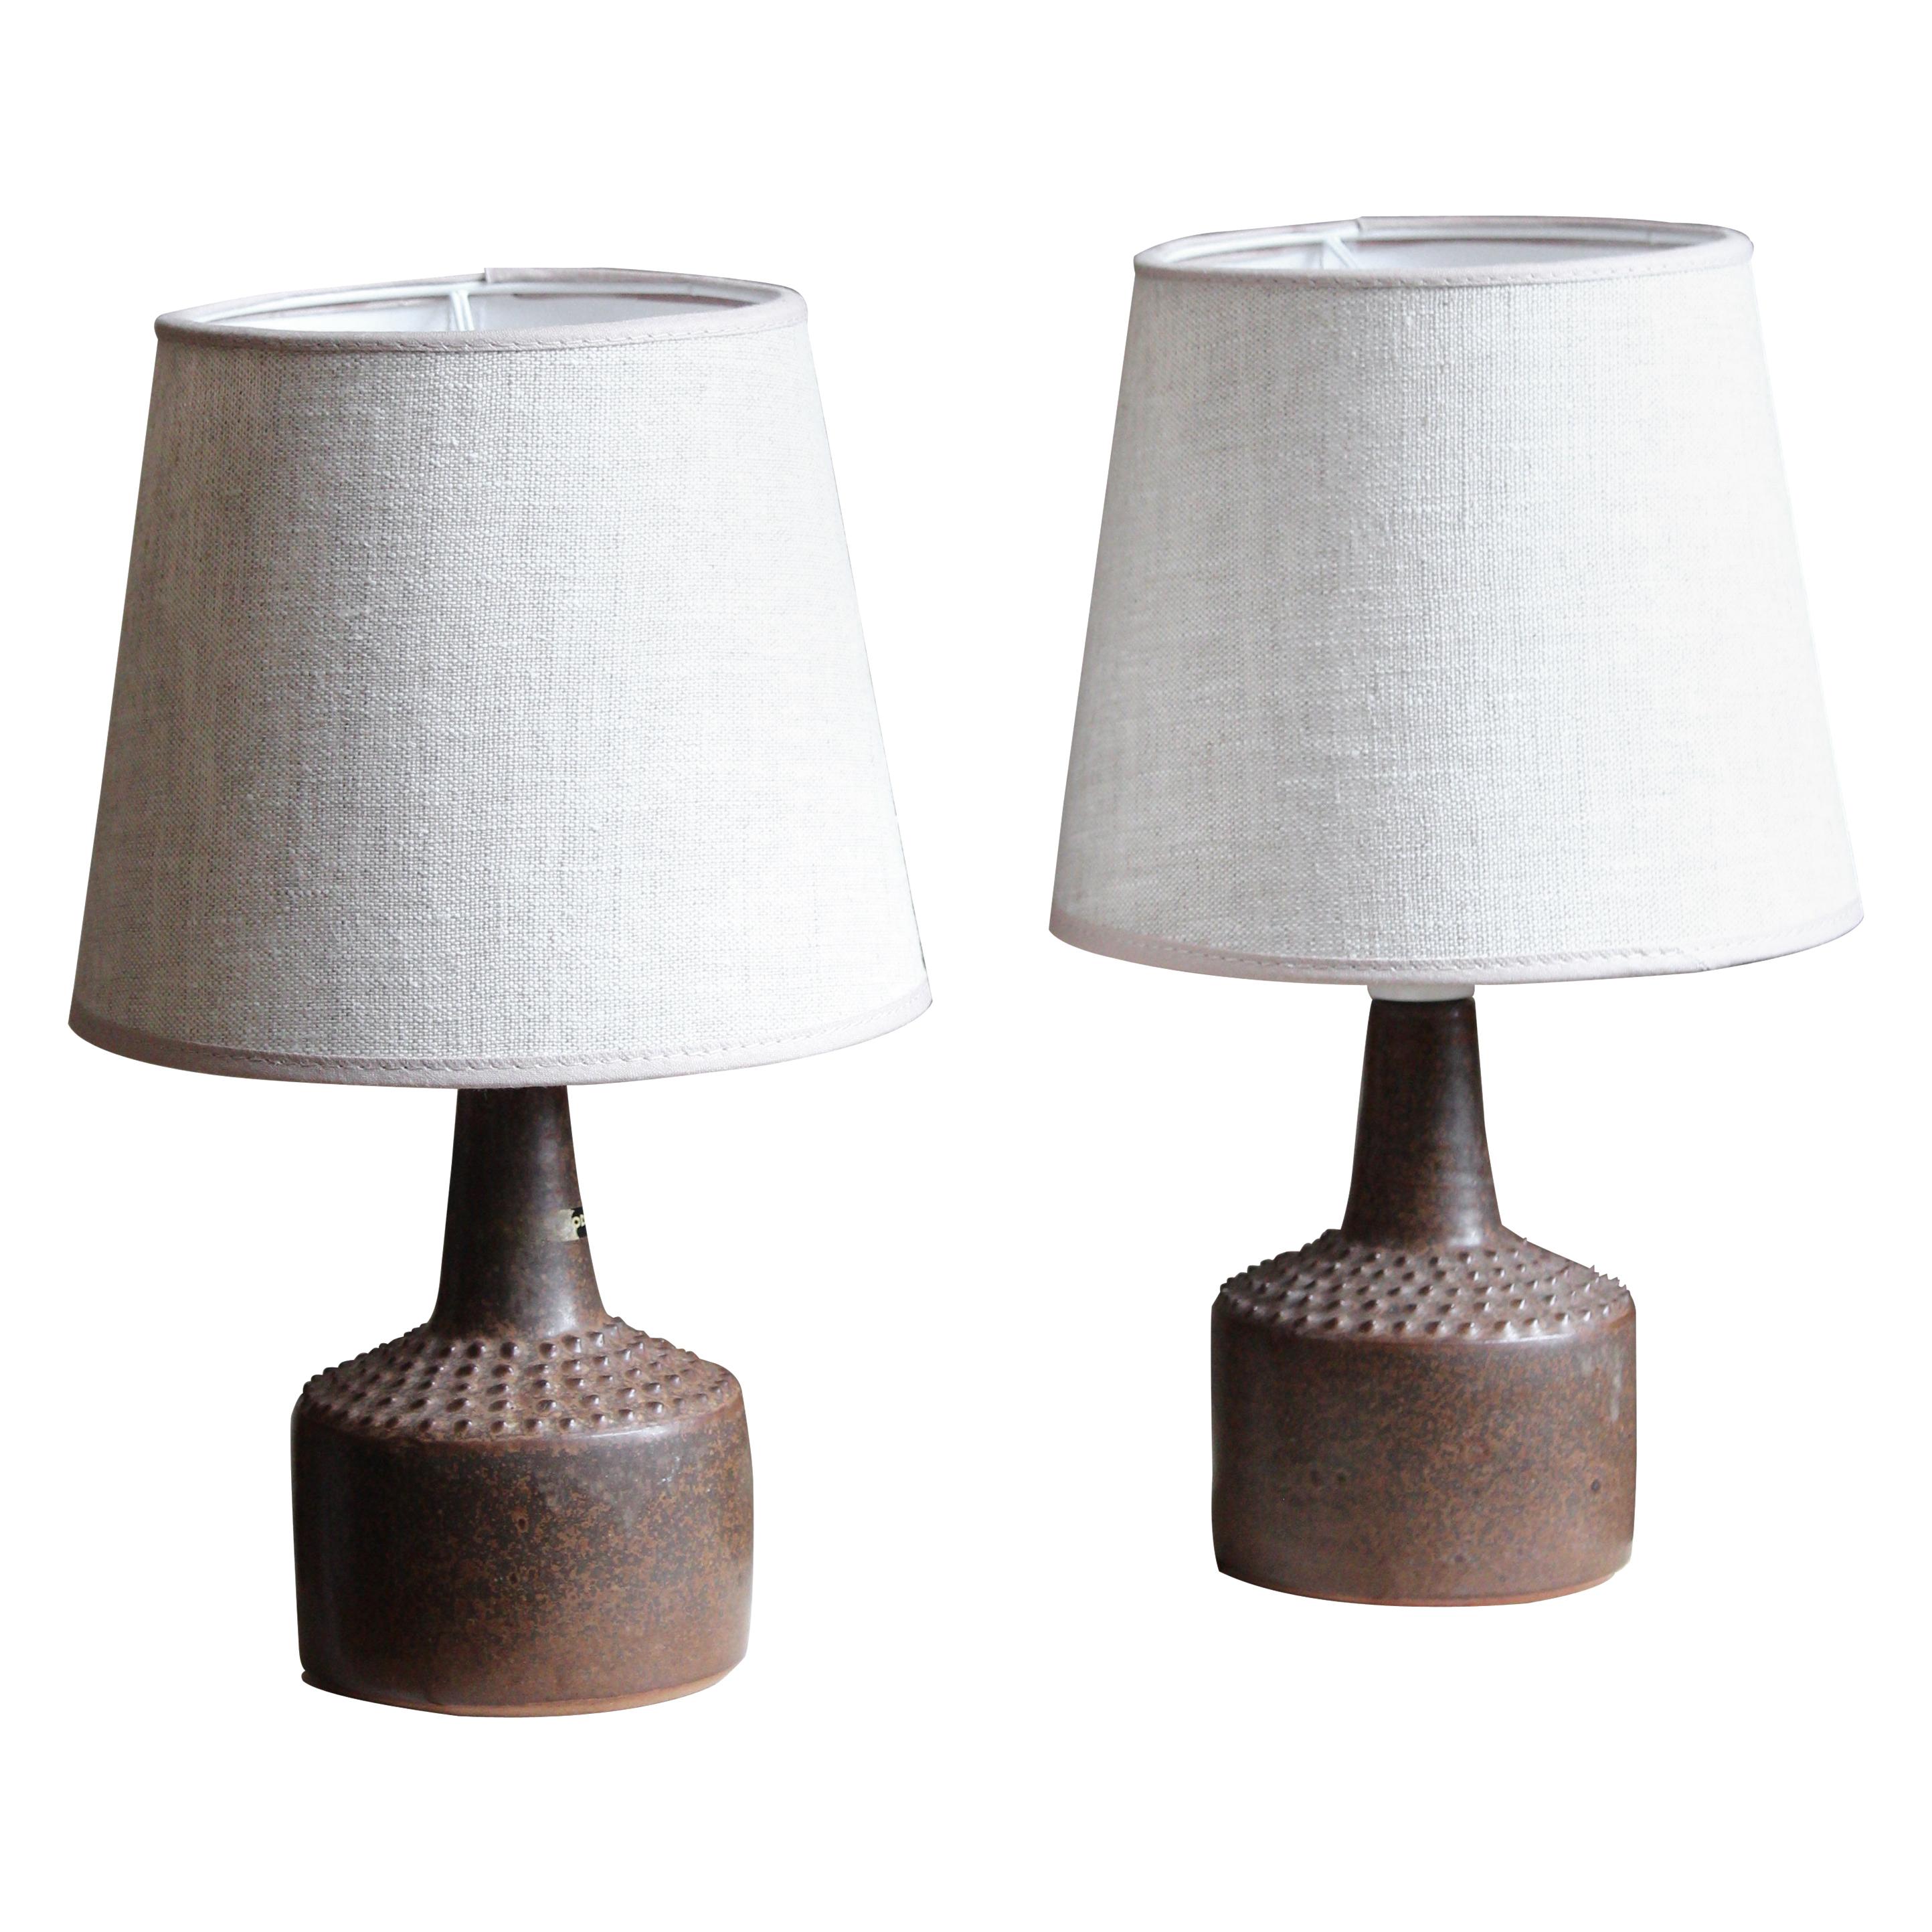 Rolf Palm, Small Table Lamps, Glazed Stoneware, Linen, Mölle, Sweden, 1960s